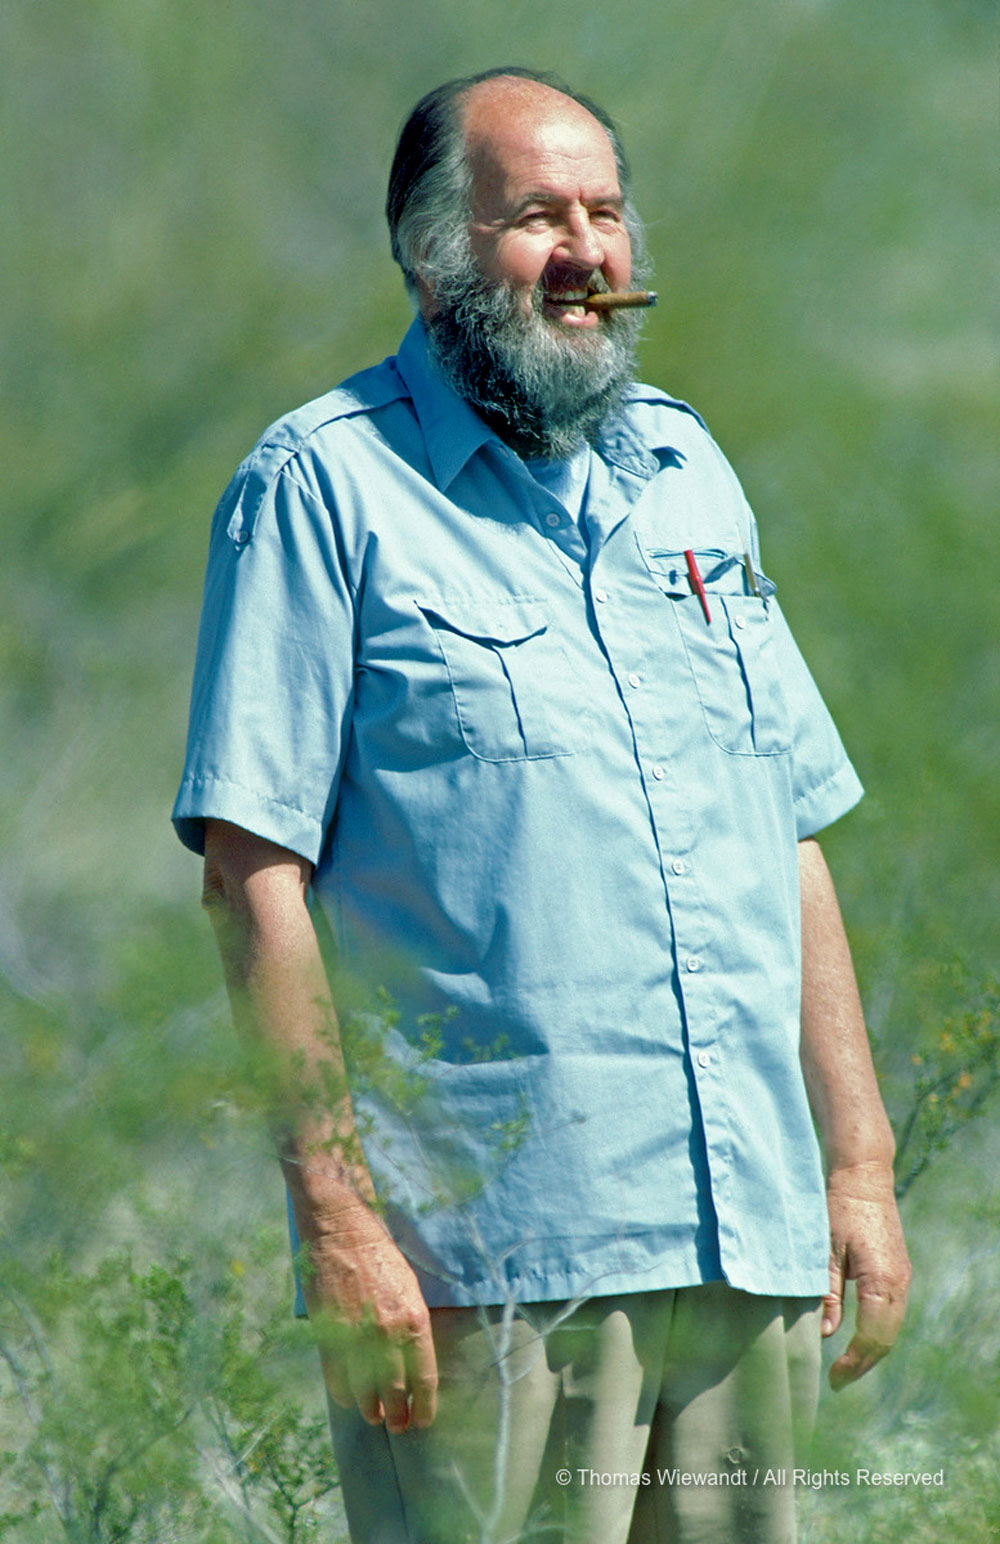 Charles H. Lowe Jr. photographed at Rancho de Las Lomas in Tucson while working with Thomas Wiewandt on a motion picture segment about Gila Monsters for the BBC's THE LIVING PLANET television series, ca. 1983. 